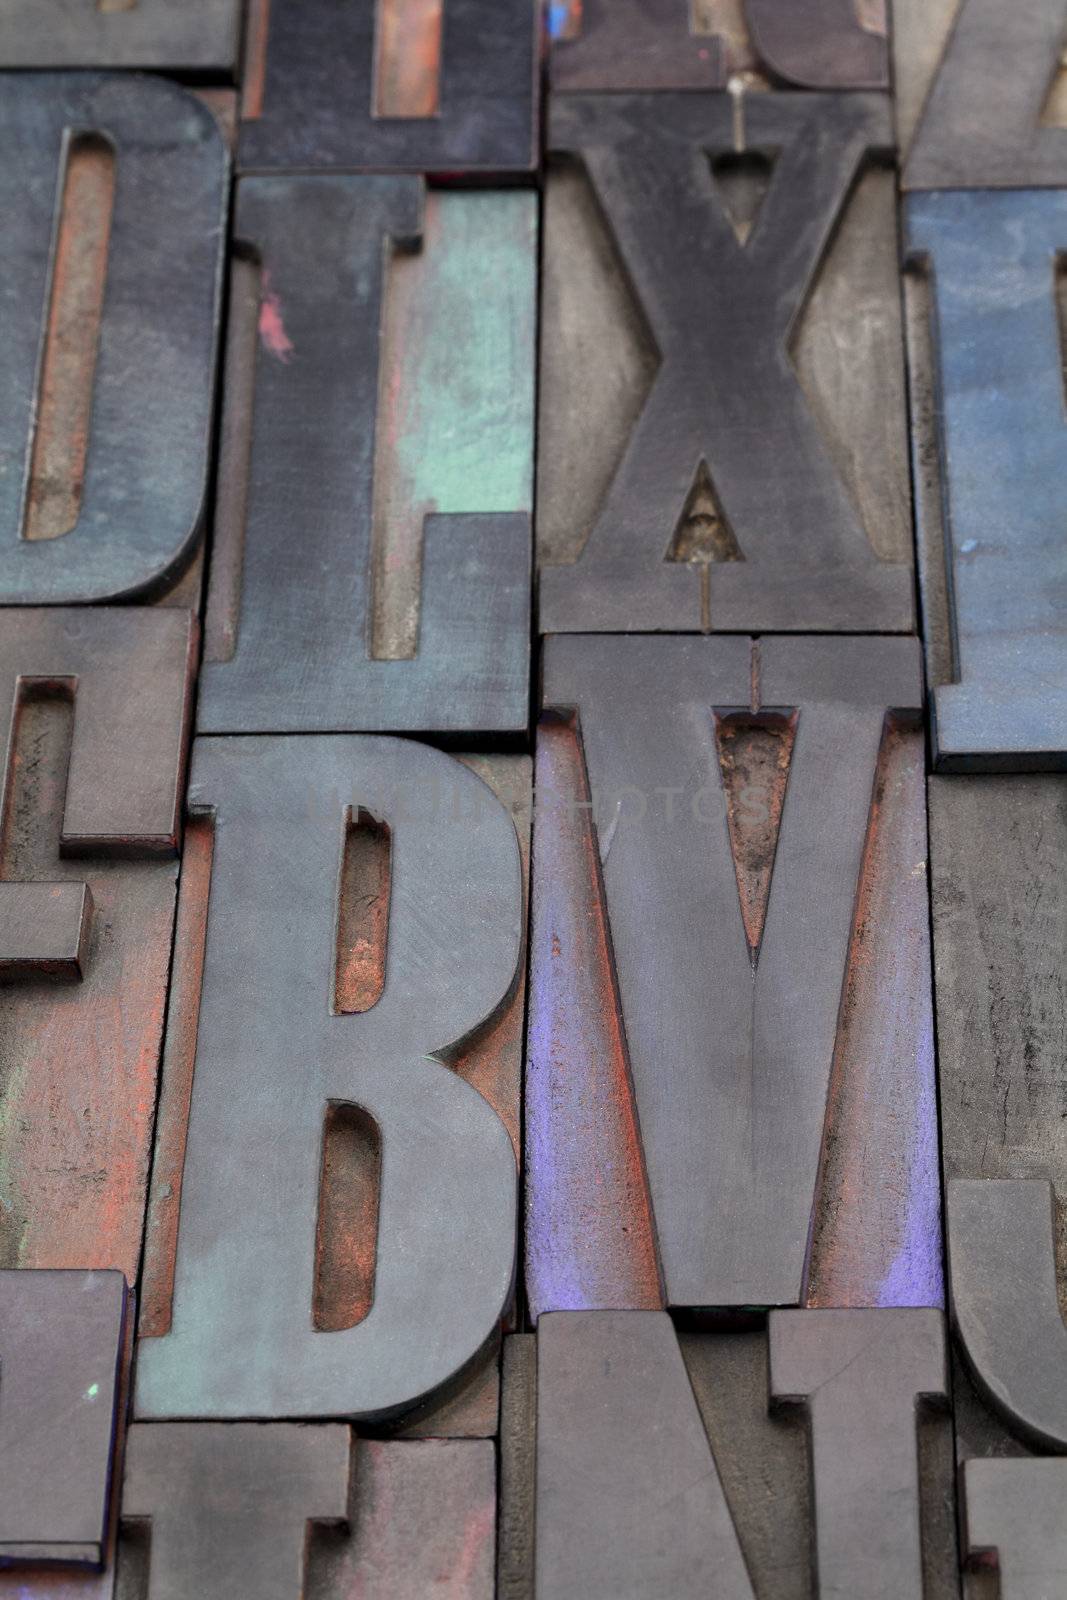 antique wood letterpress printing blocks with color ink patina, random collection with L, X, V, and B letters